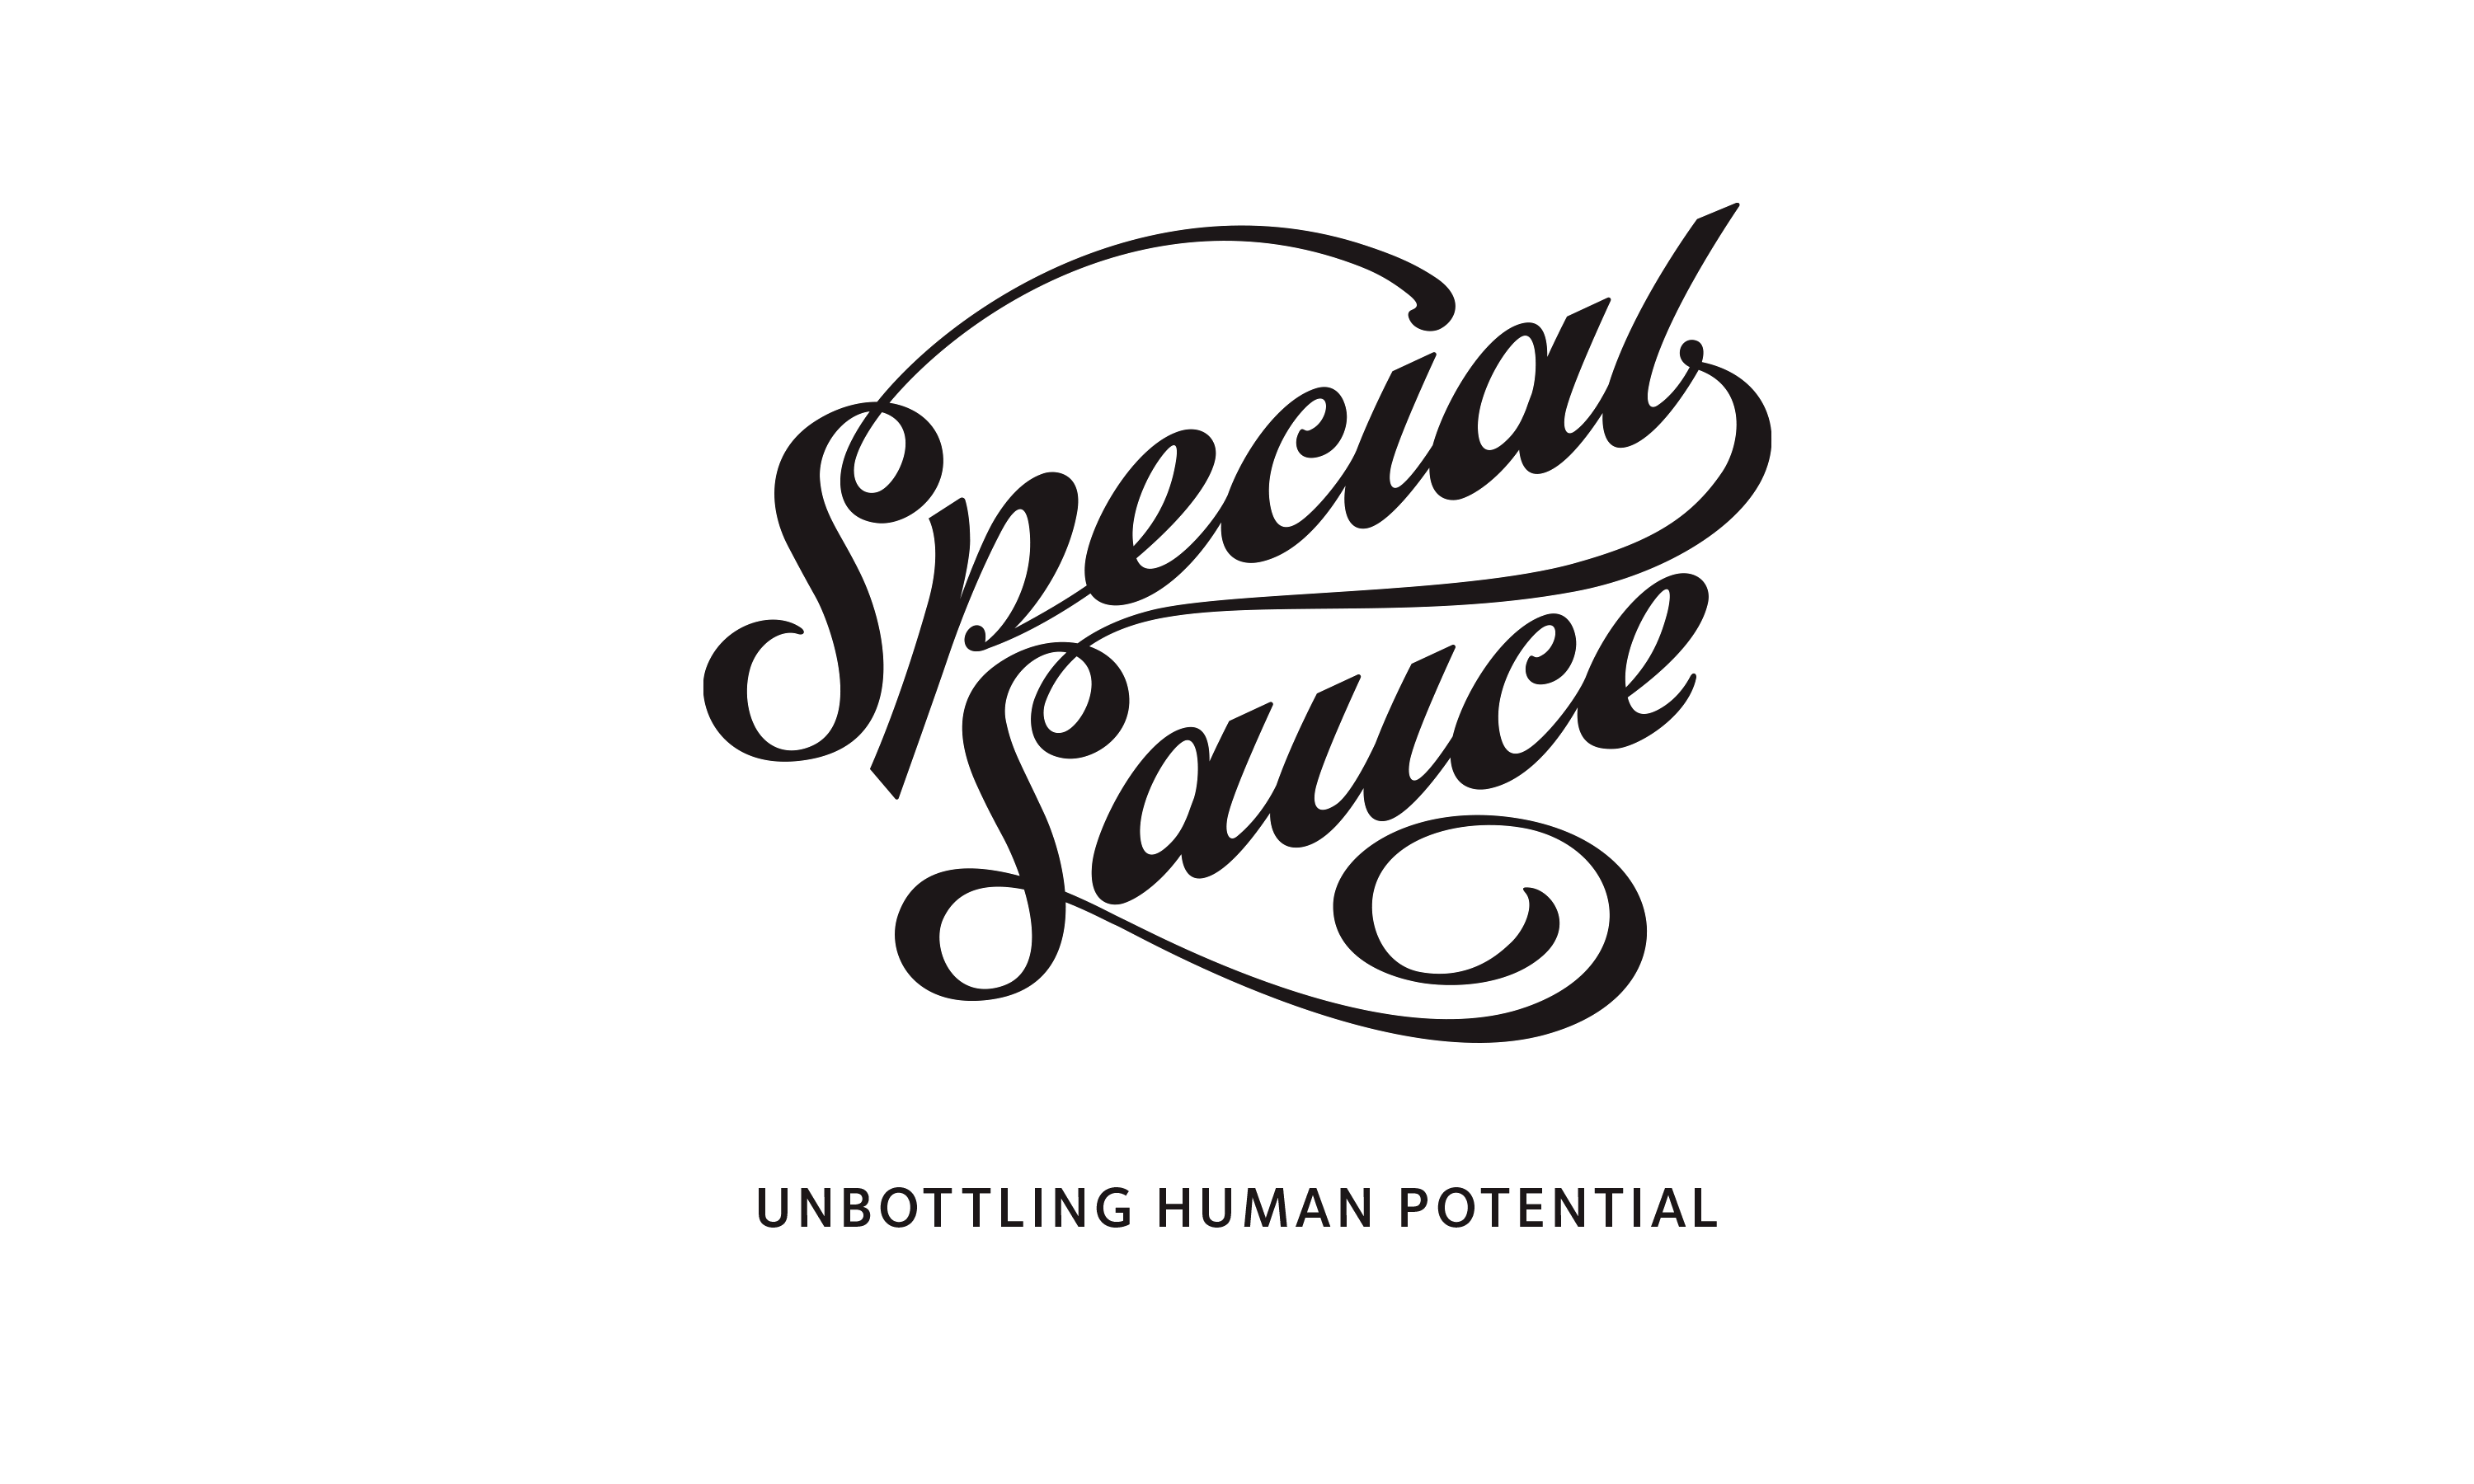 Branding by Neon - Special Sauce logo designed by Dana Robertson